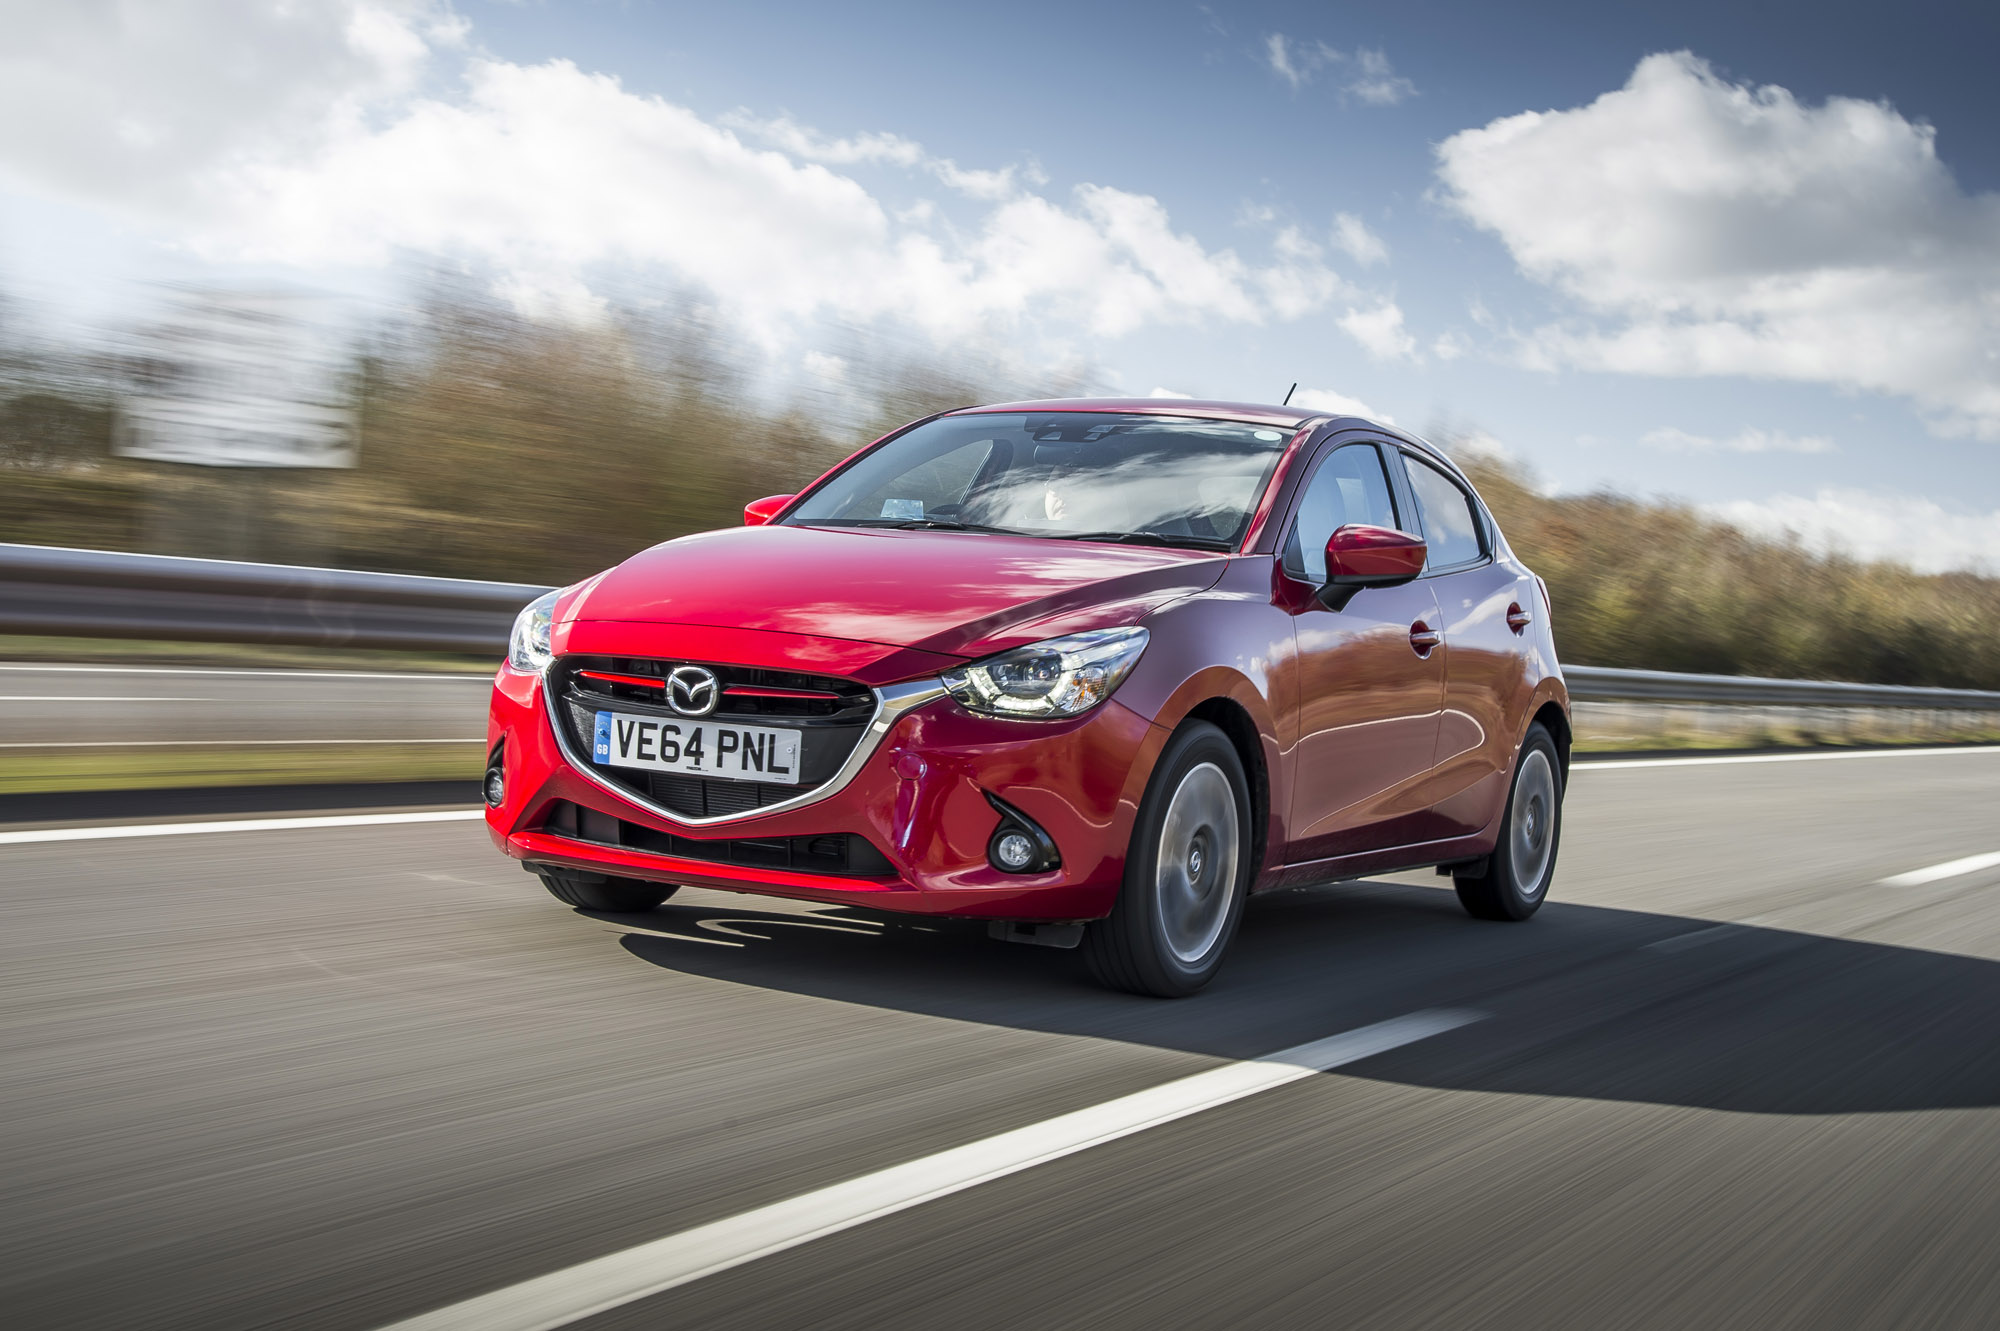 Mazda 2 review prices, specs and 060 time evo